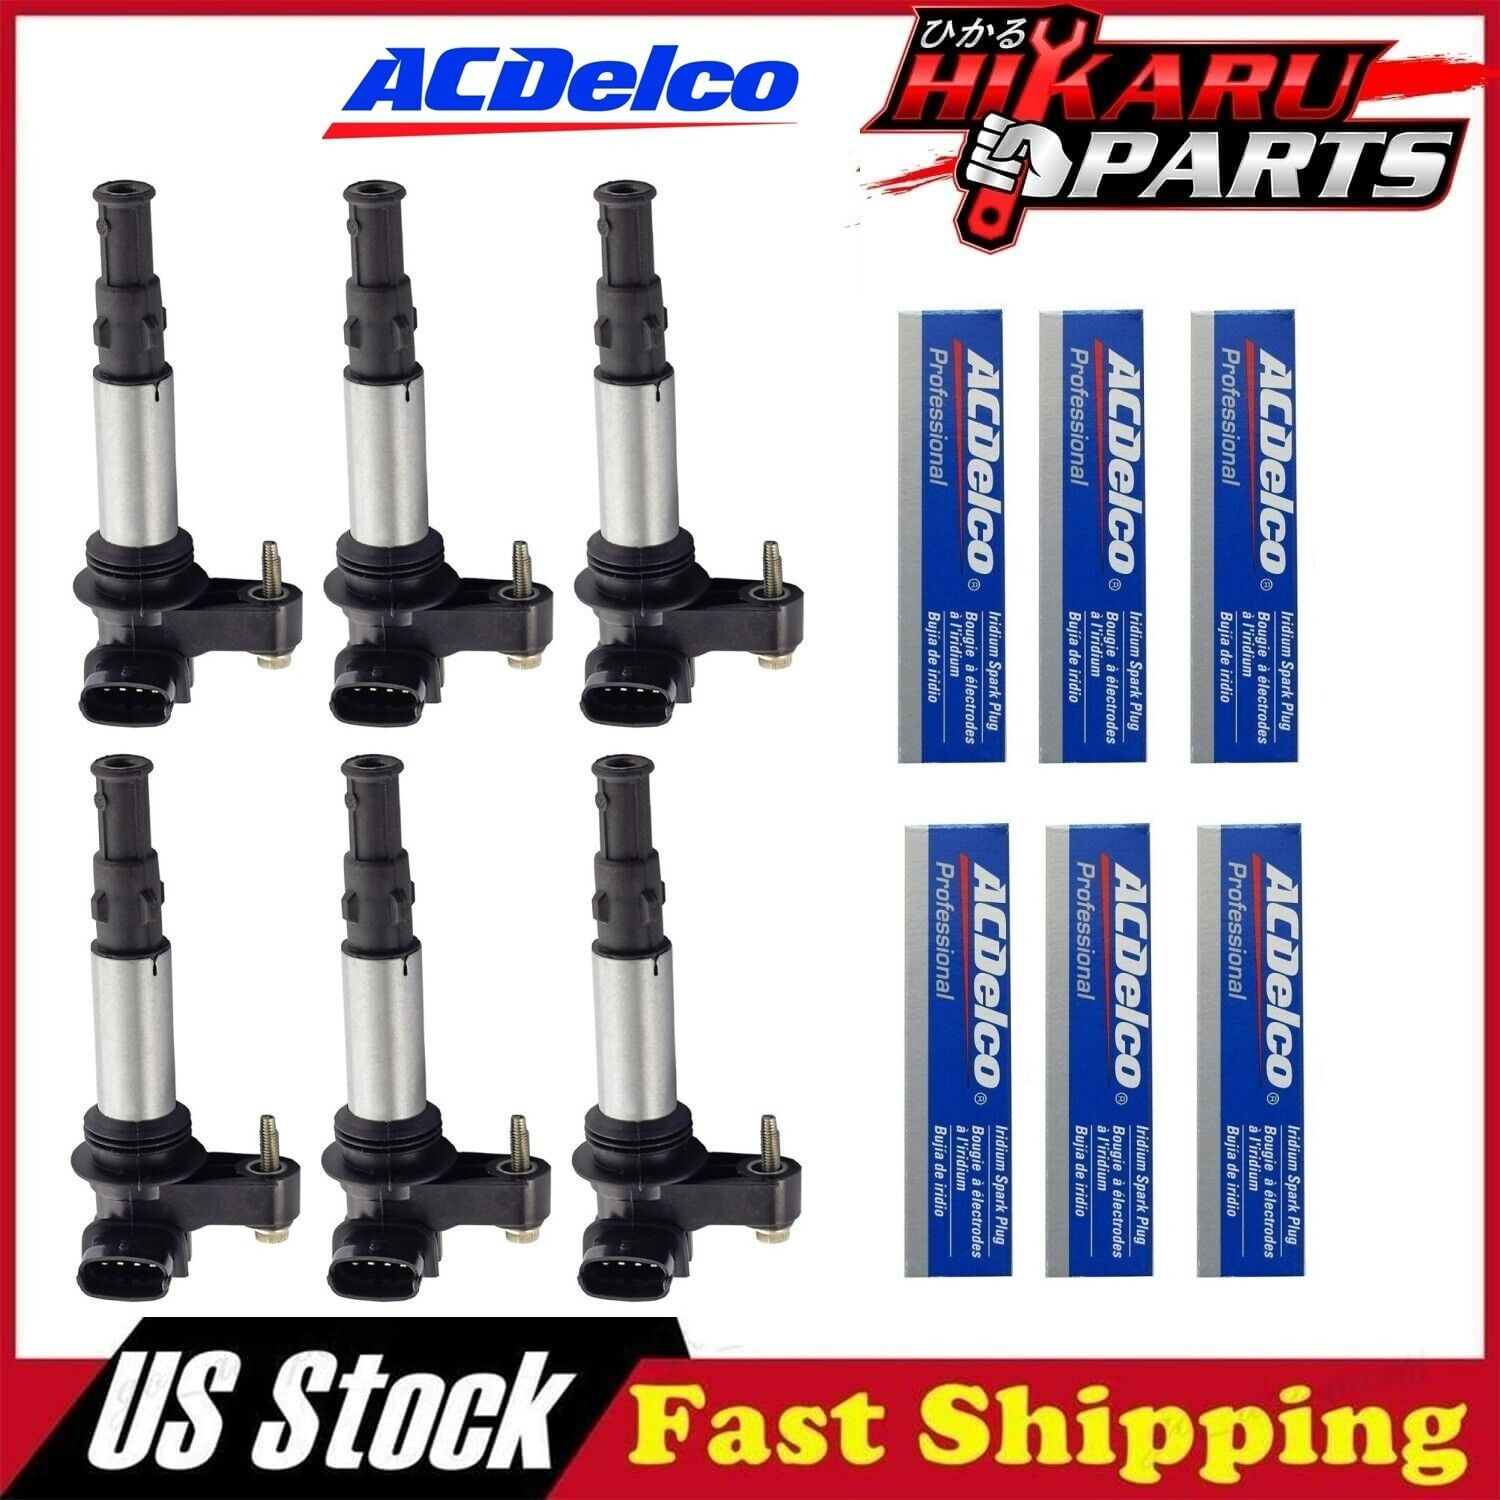 6x Spark Plug & 6x Ignition Coil for Cadillac CTS Buick GMC 3.6L